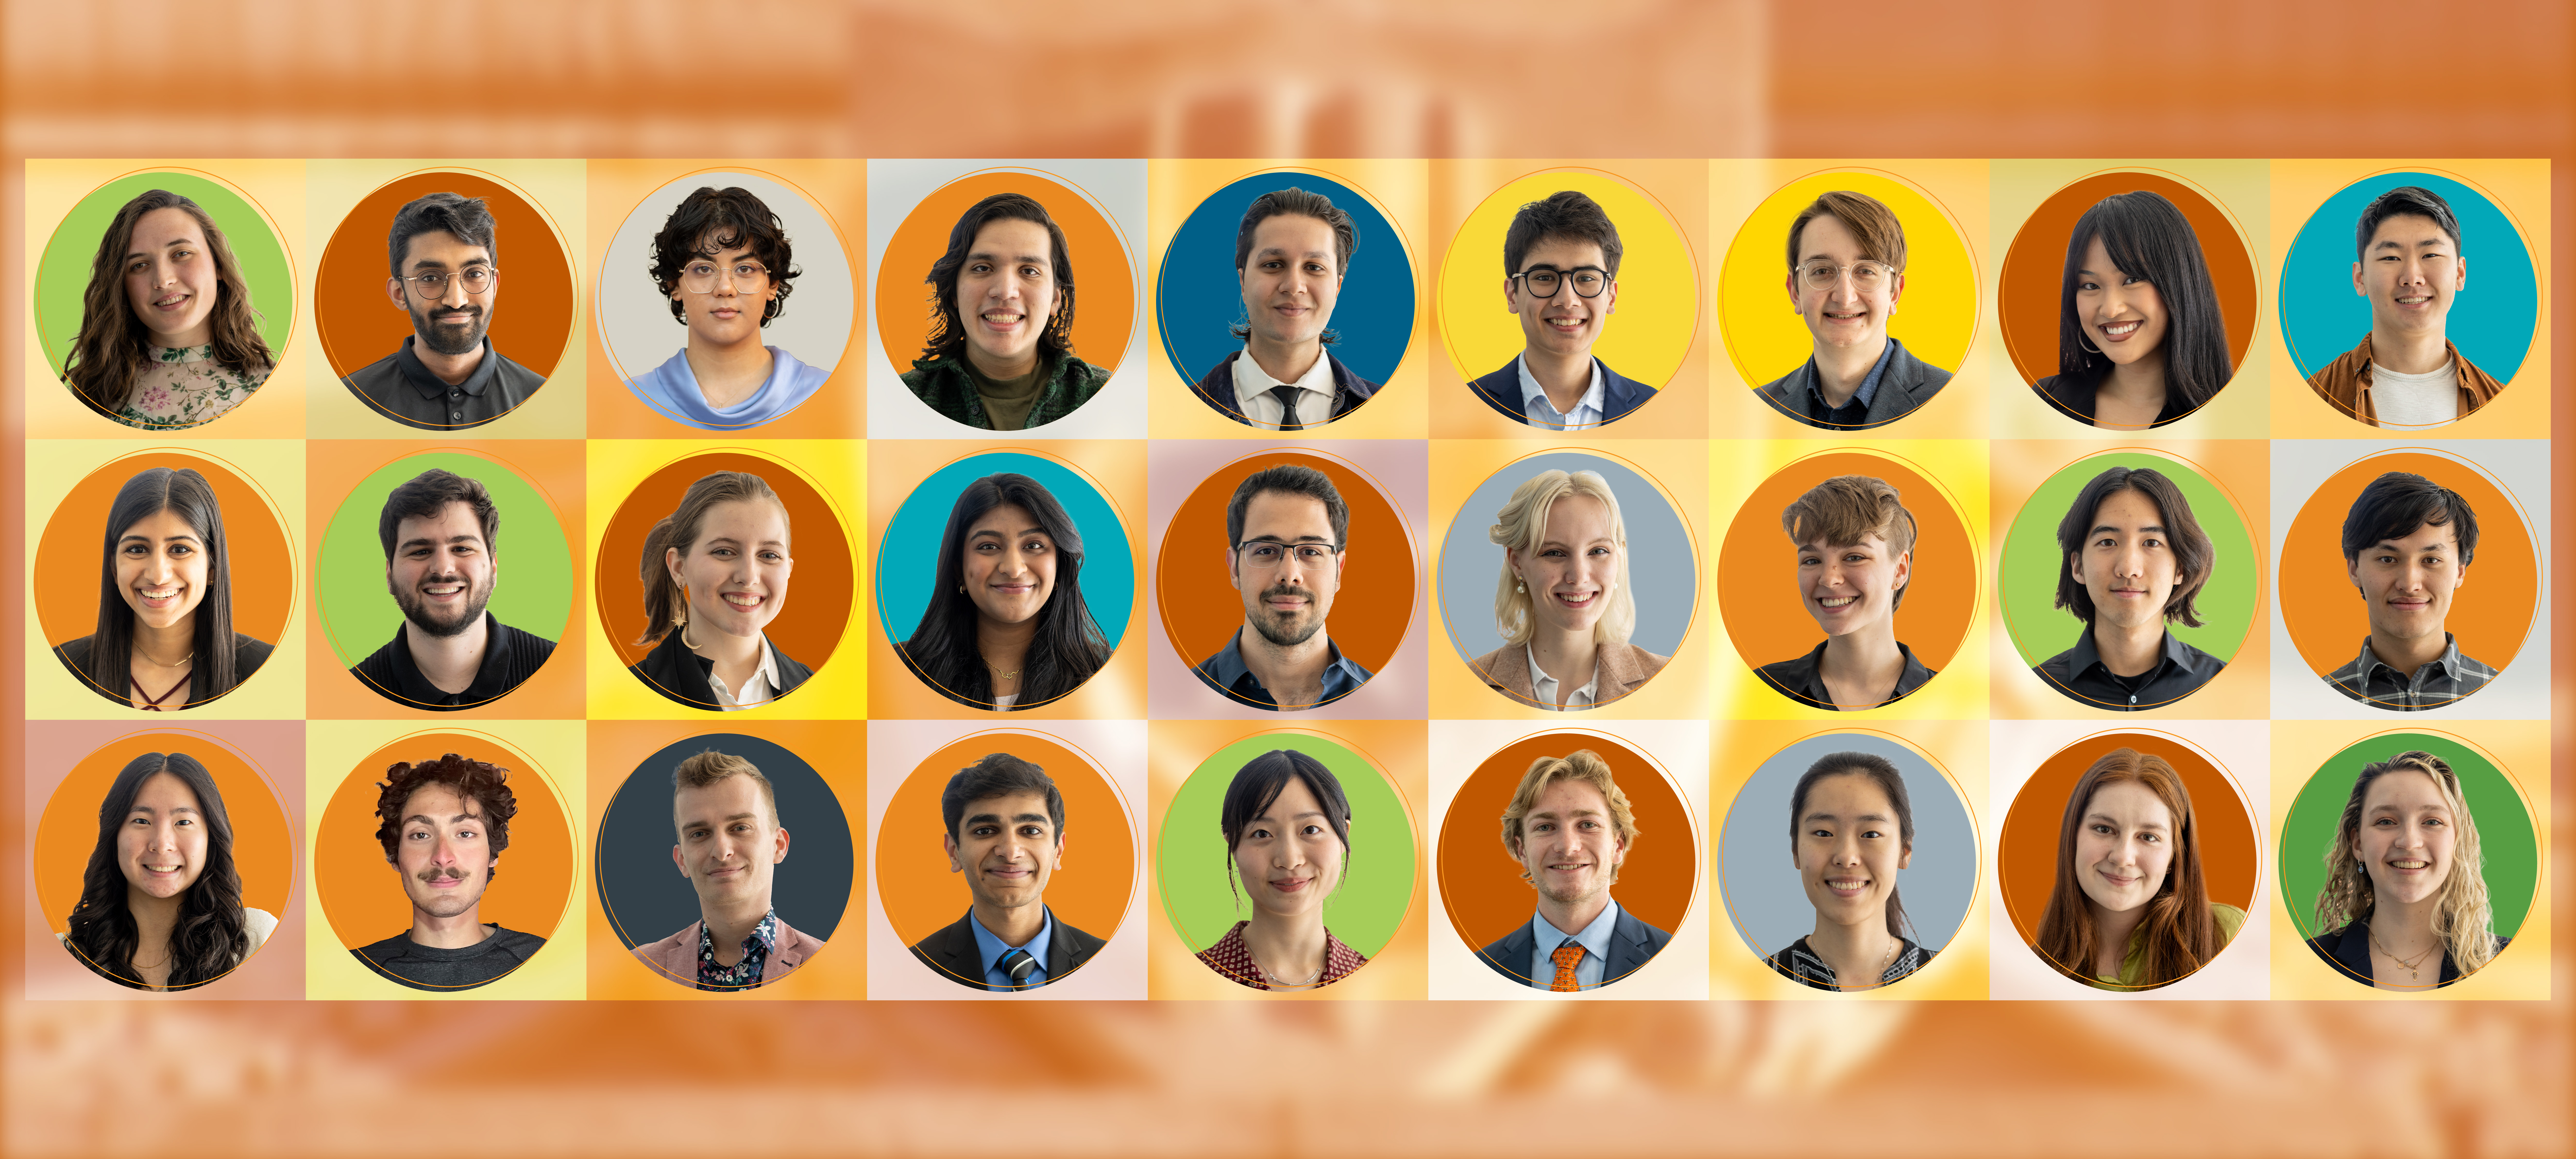 Image includes the profile photos of the DHG honorees on an orange background